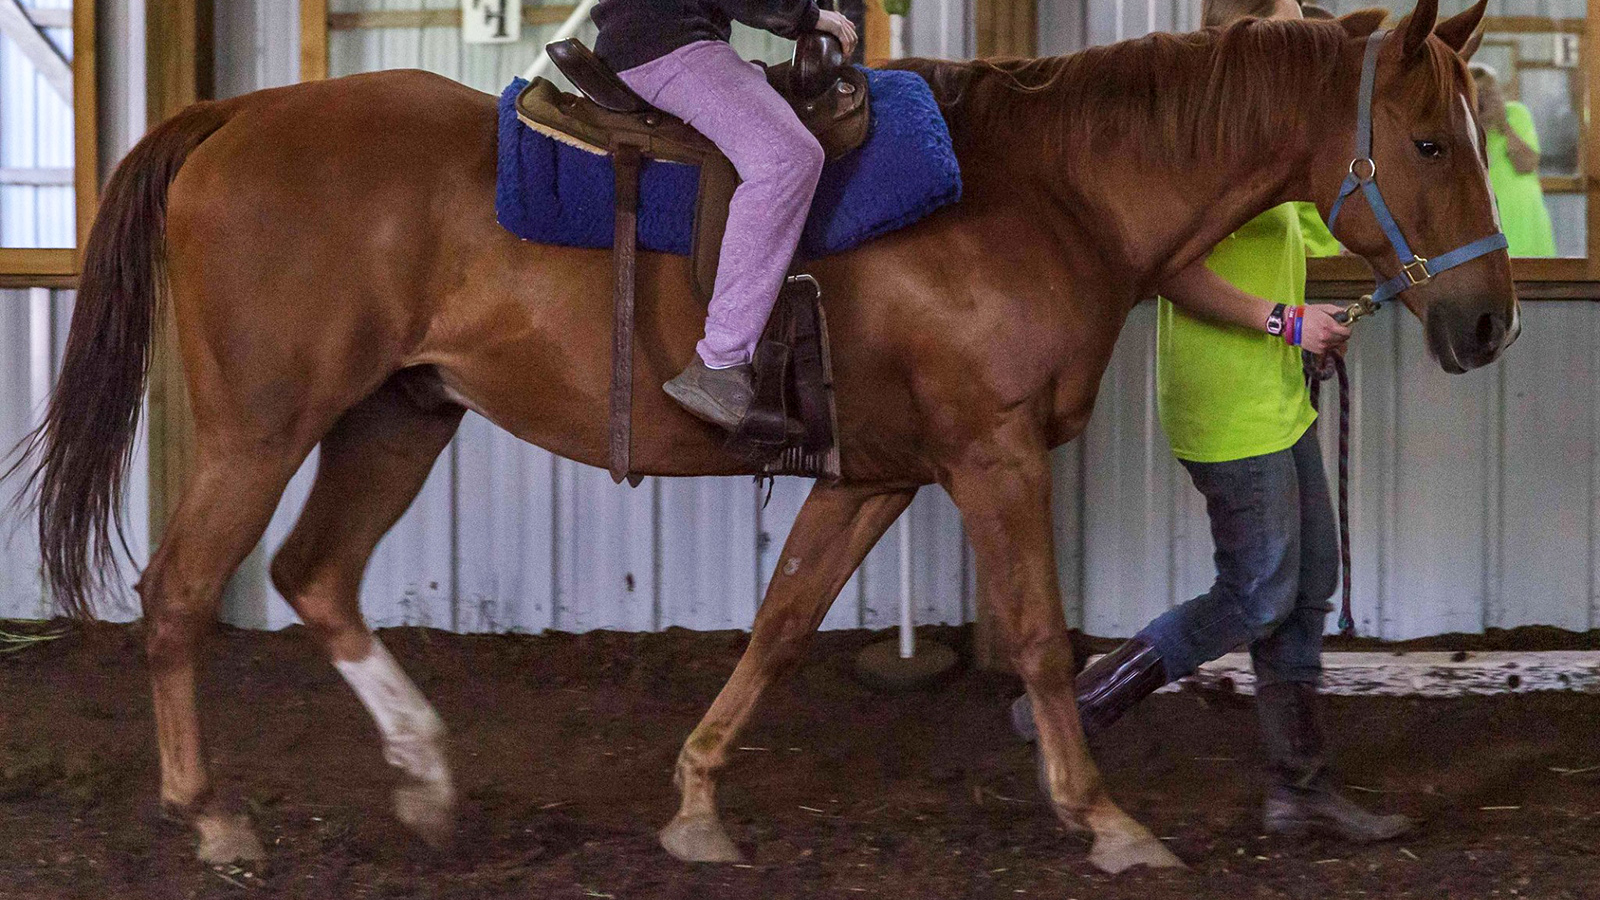 Cropped photo of student riding on a horse and another person leading the bridle inside a stable